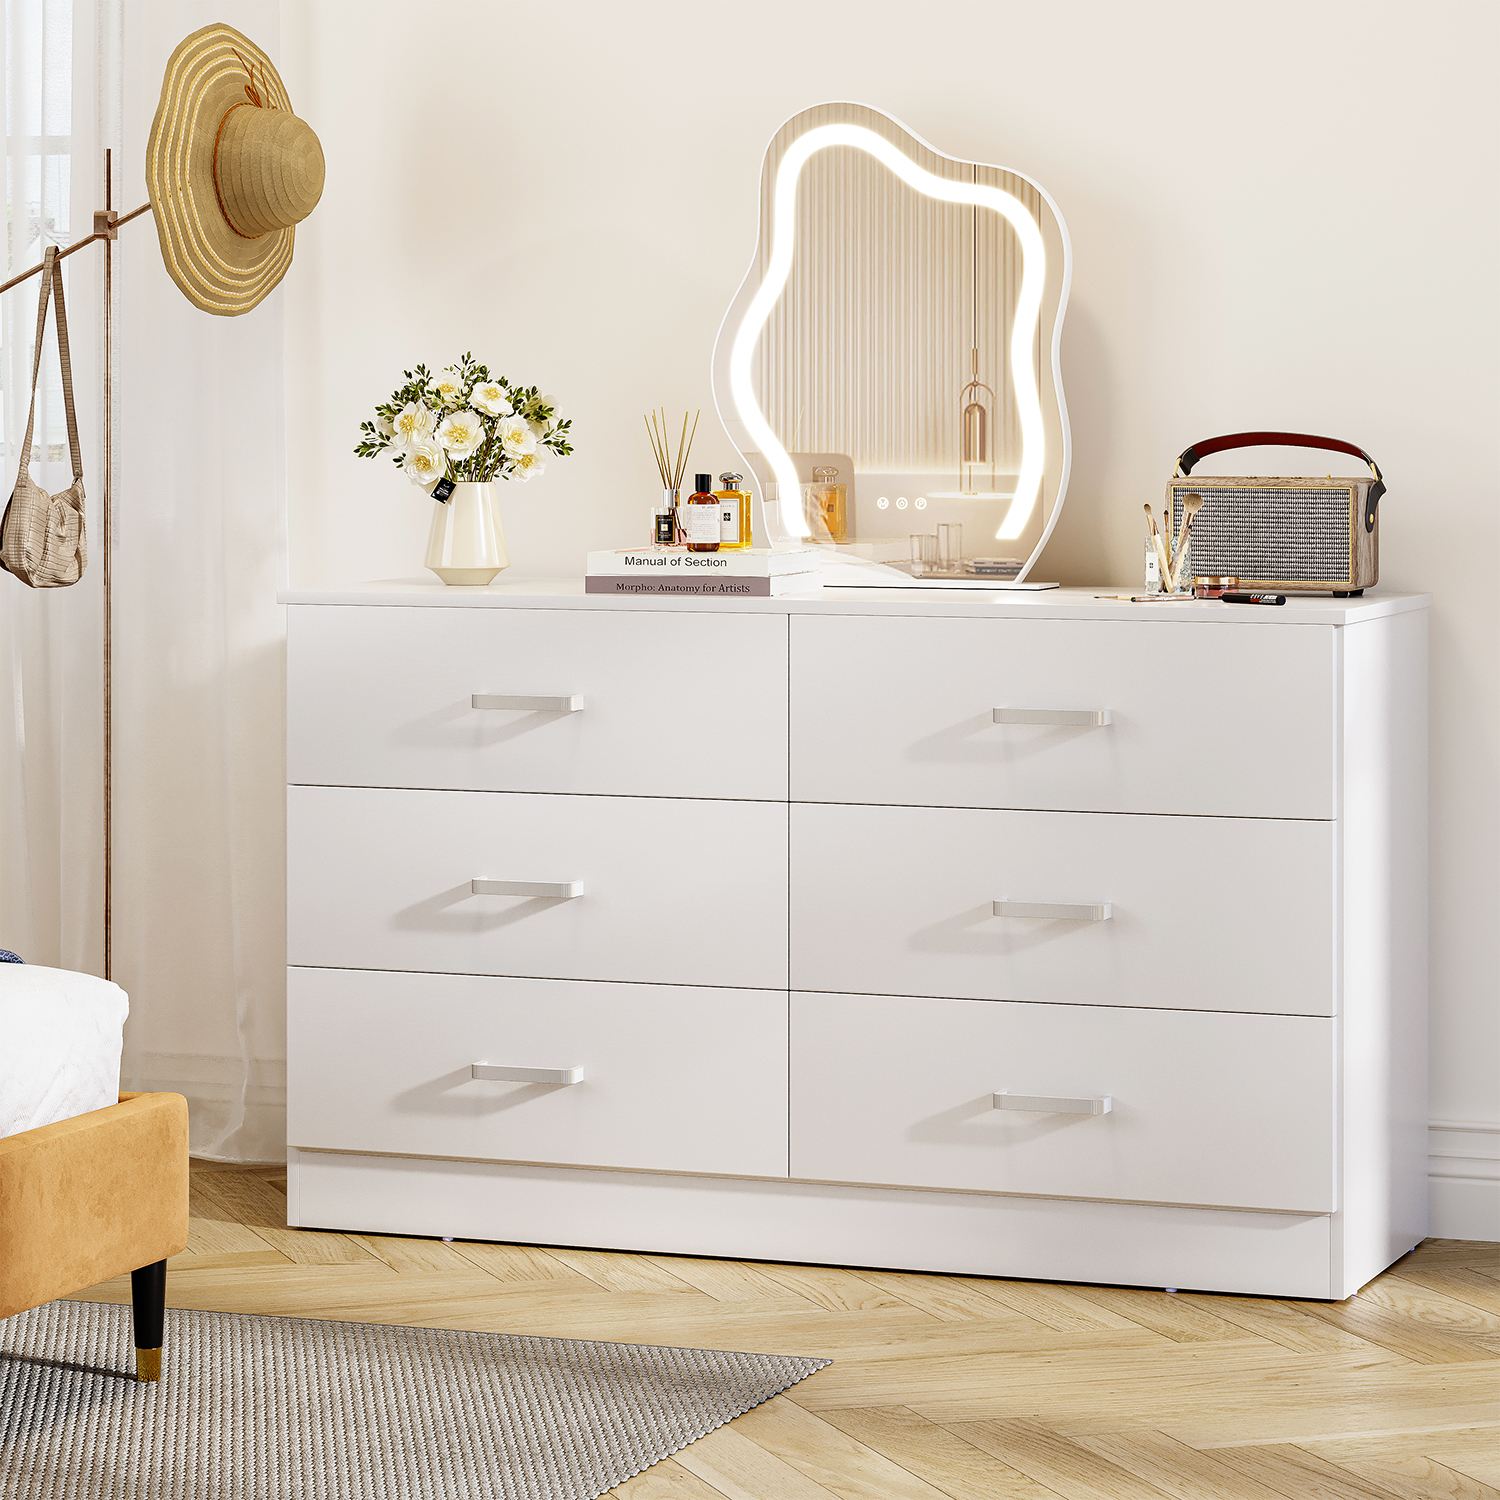 Winkalon 6 Drawer White Double Dresser, Wood Storage Cabinet with Easy Pull Out Handles for Living Room,Chest of Drawers for Bedroom - image 1 of 11